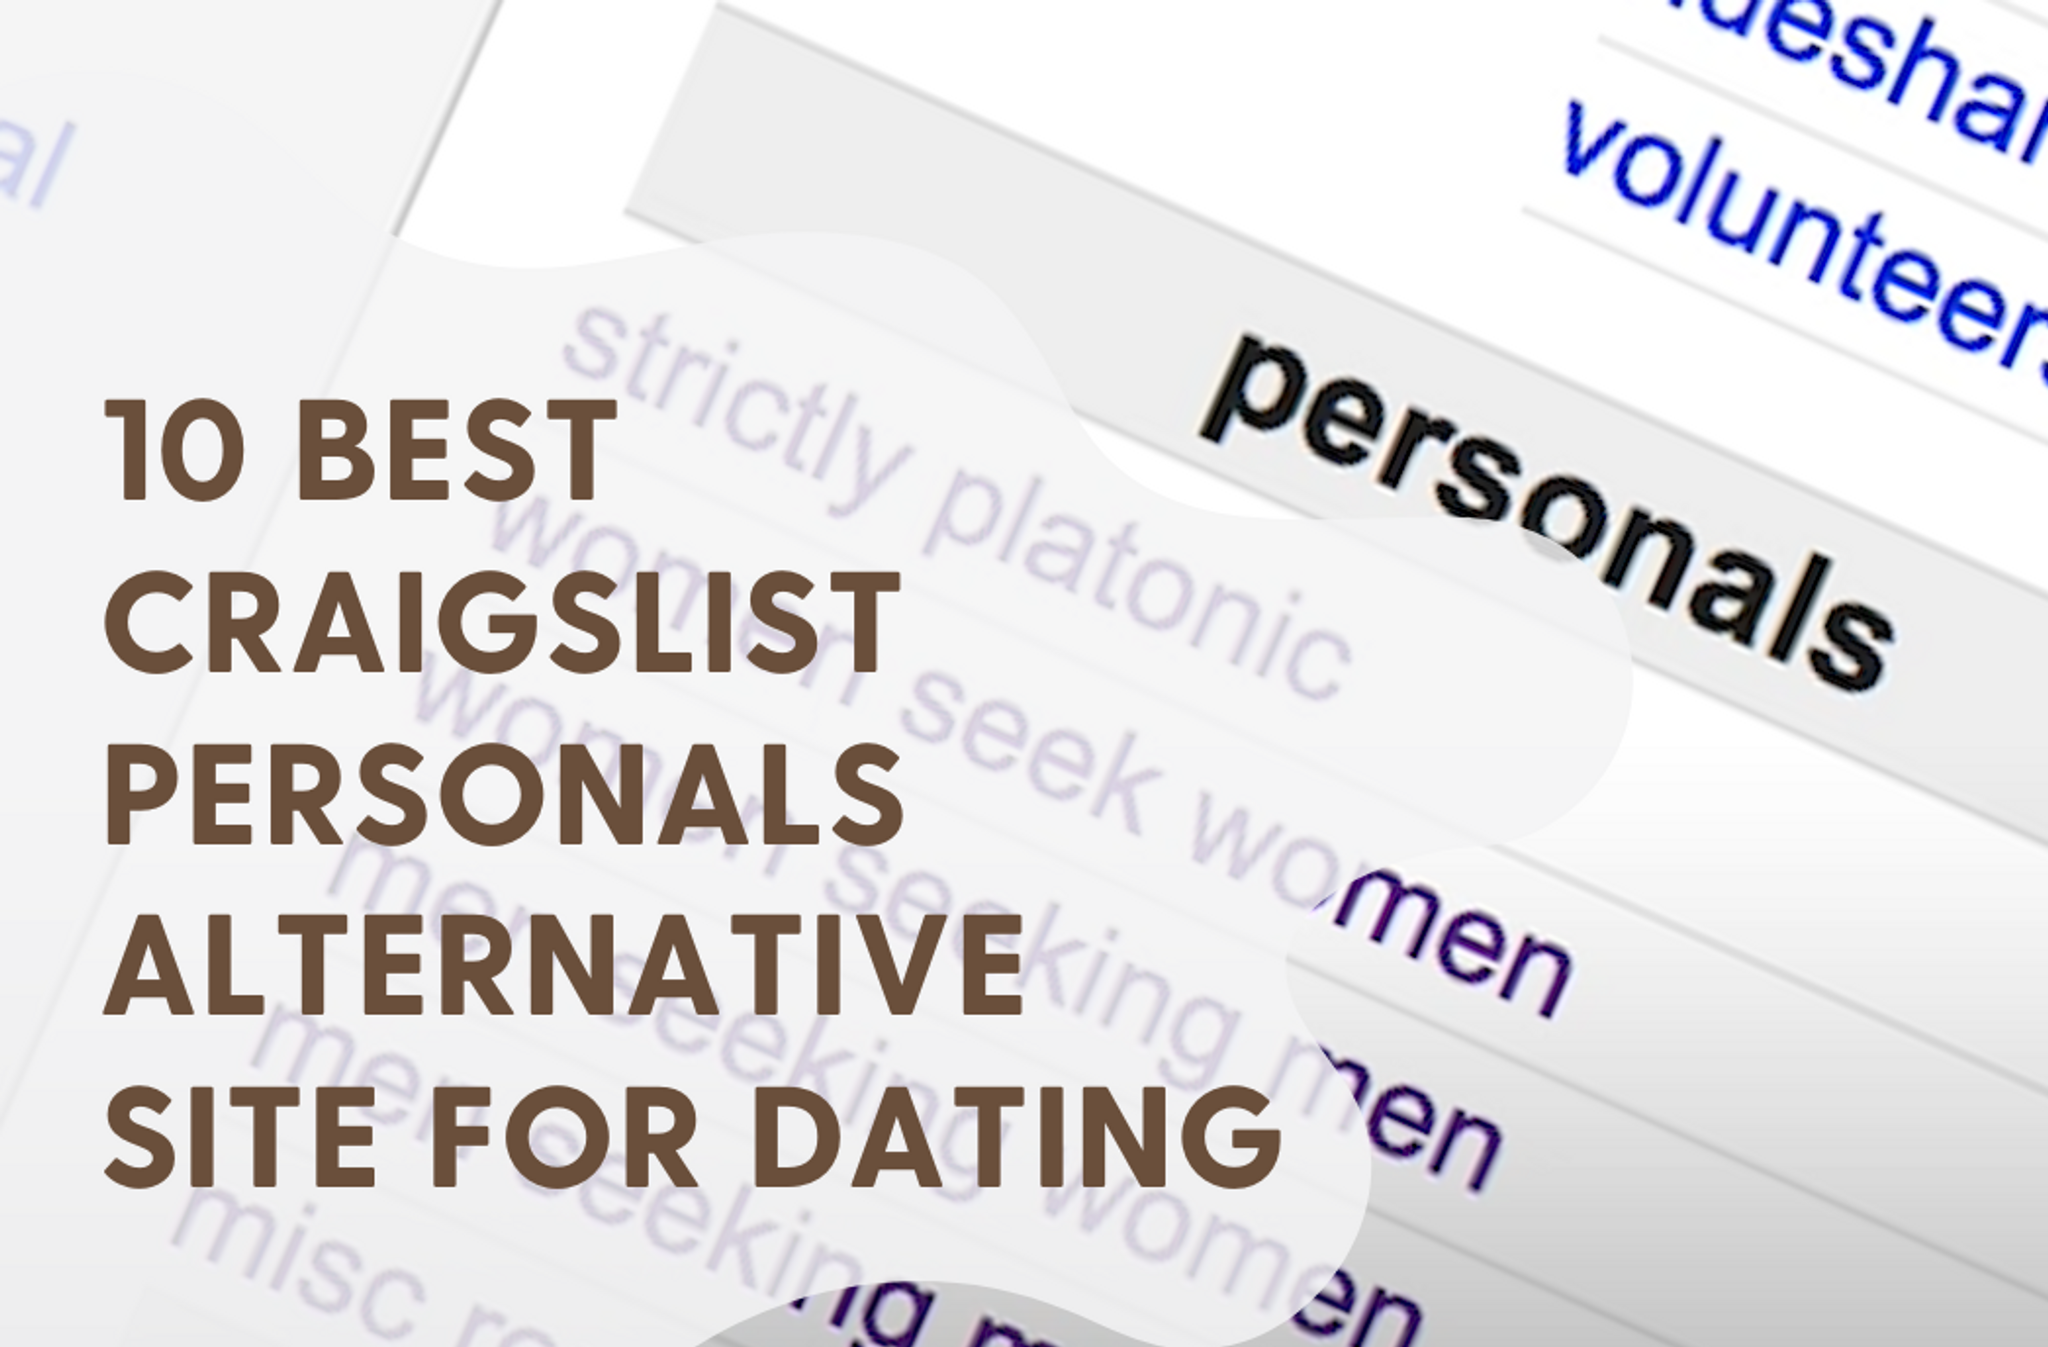 10 Best Craigslist Personals Alternative Sites for Dating in 2023